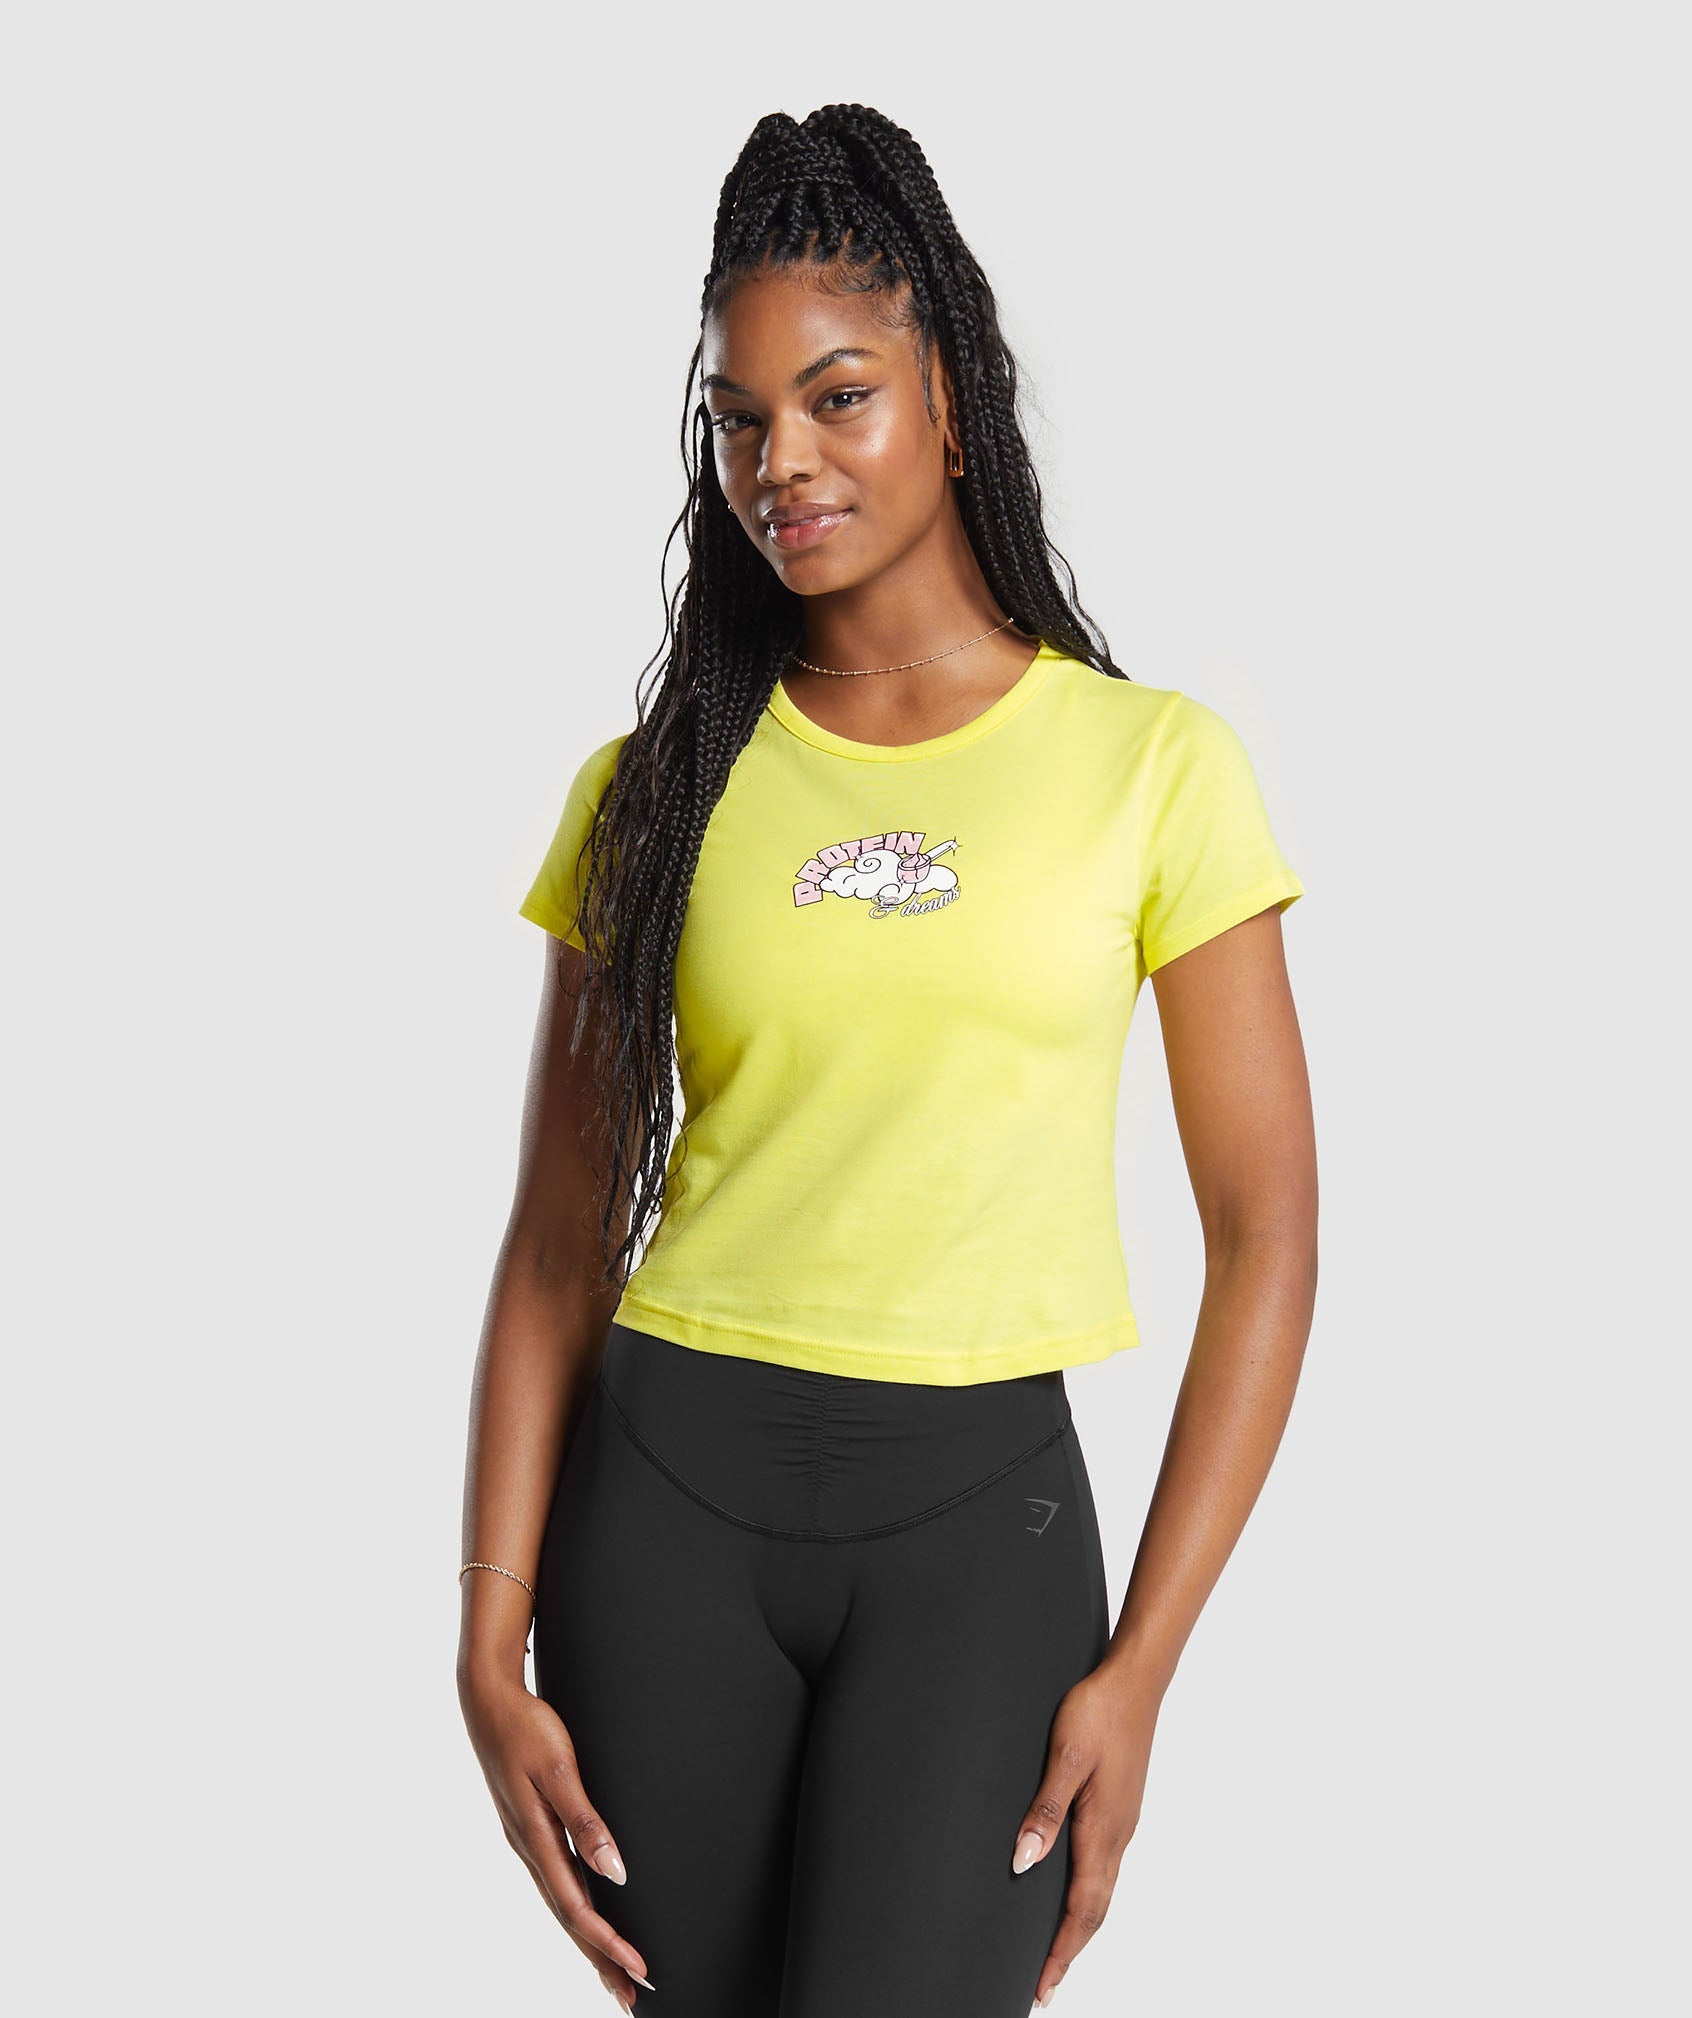 Protein & Dreams  Baby T-Shirt in Lemon Yellow - view 1